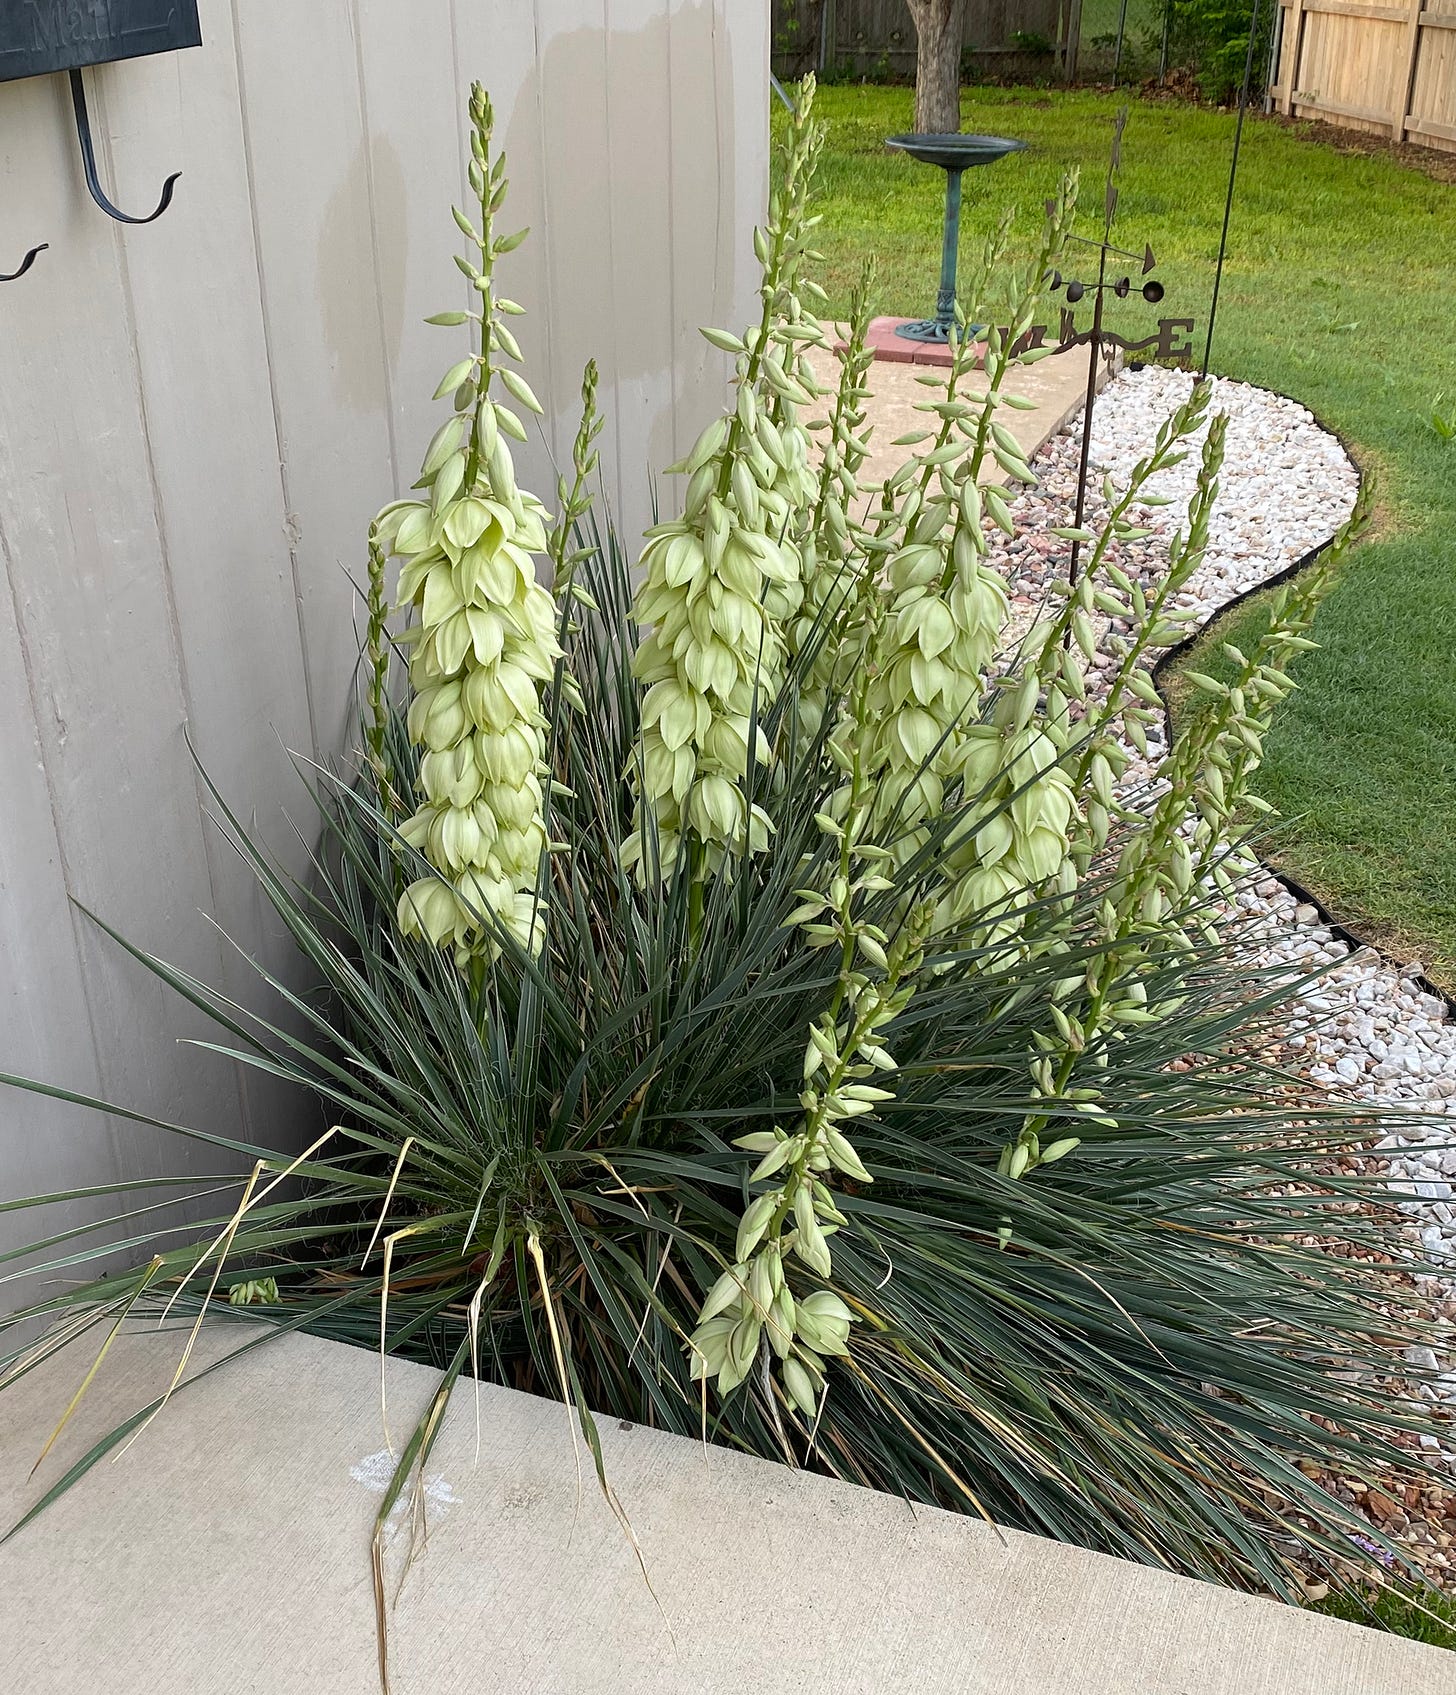 yuccas in bloom